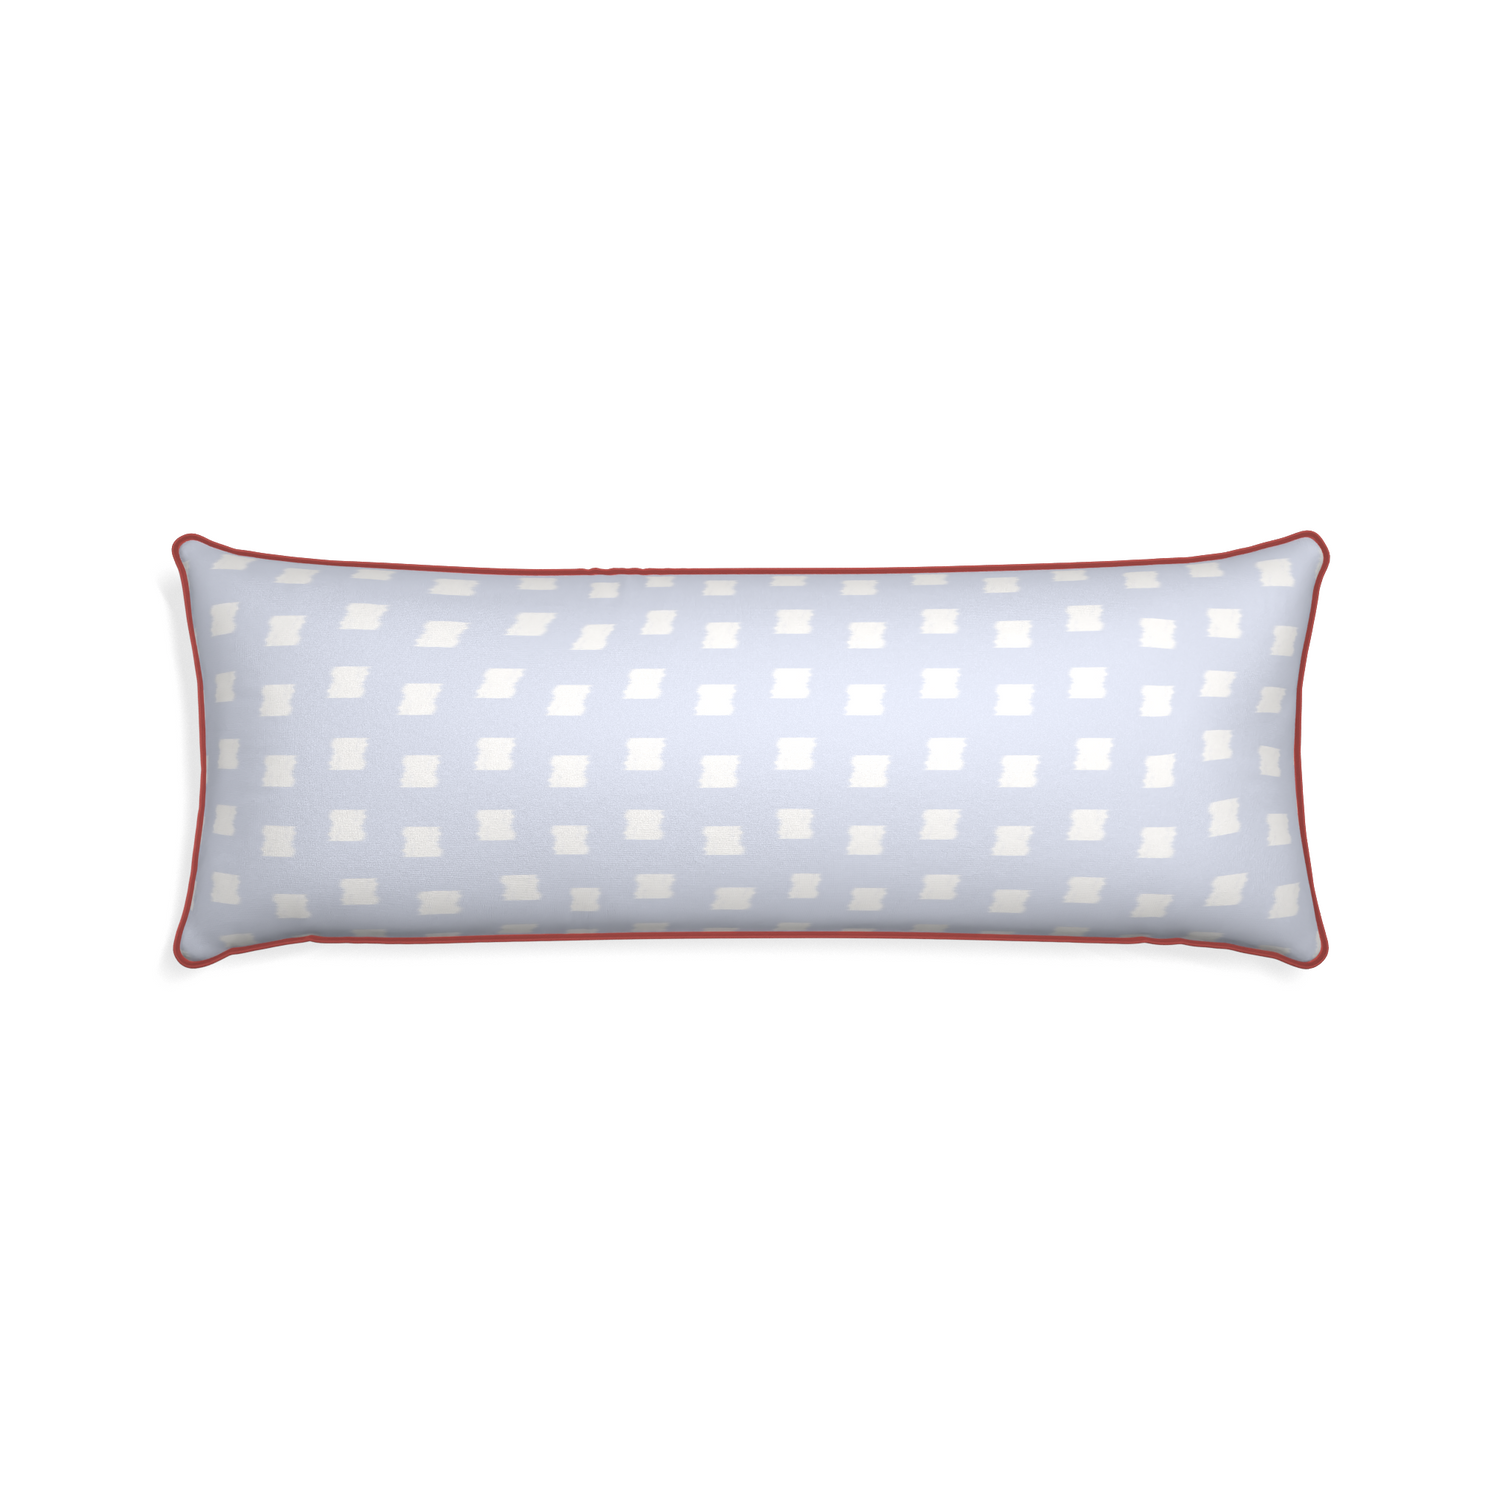 Xl-lumbar denton custom sky blue patternpillow with c piping on white background